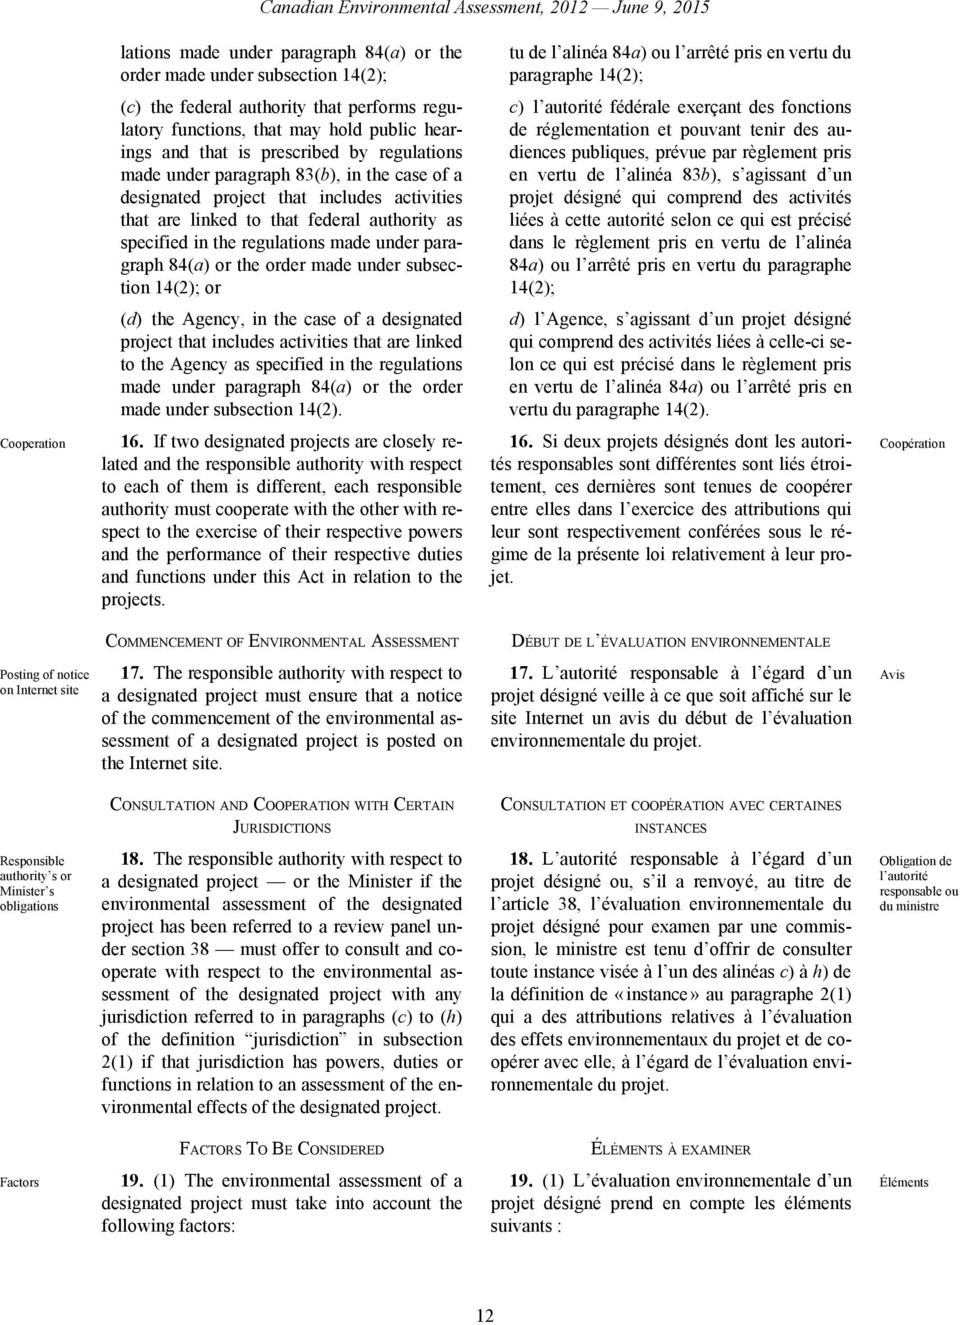 includes activities that are linked to that federal authority as specified in the regulations made under paragraph 84(a) or the order made under subsection 14(2); or c) l autorité fédérale exerçant